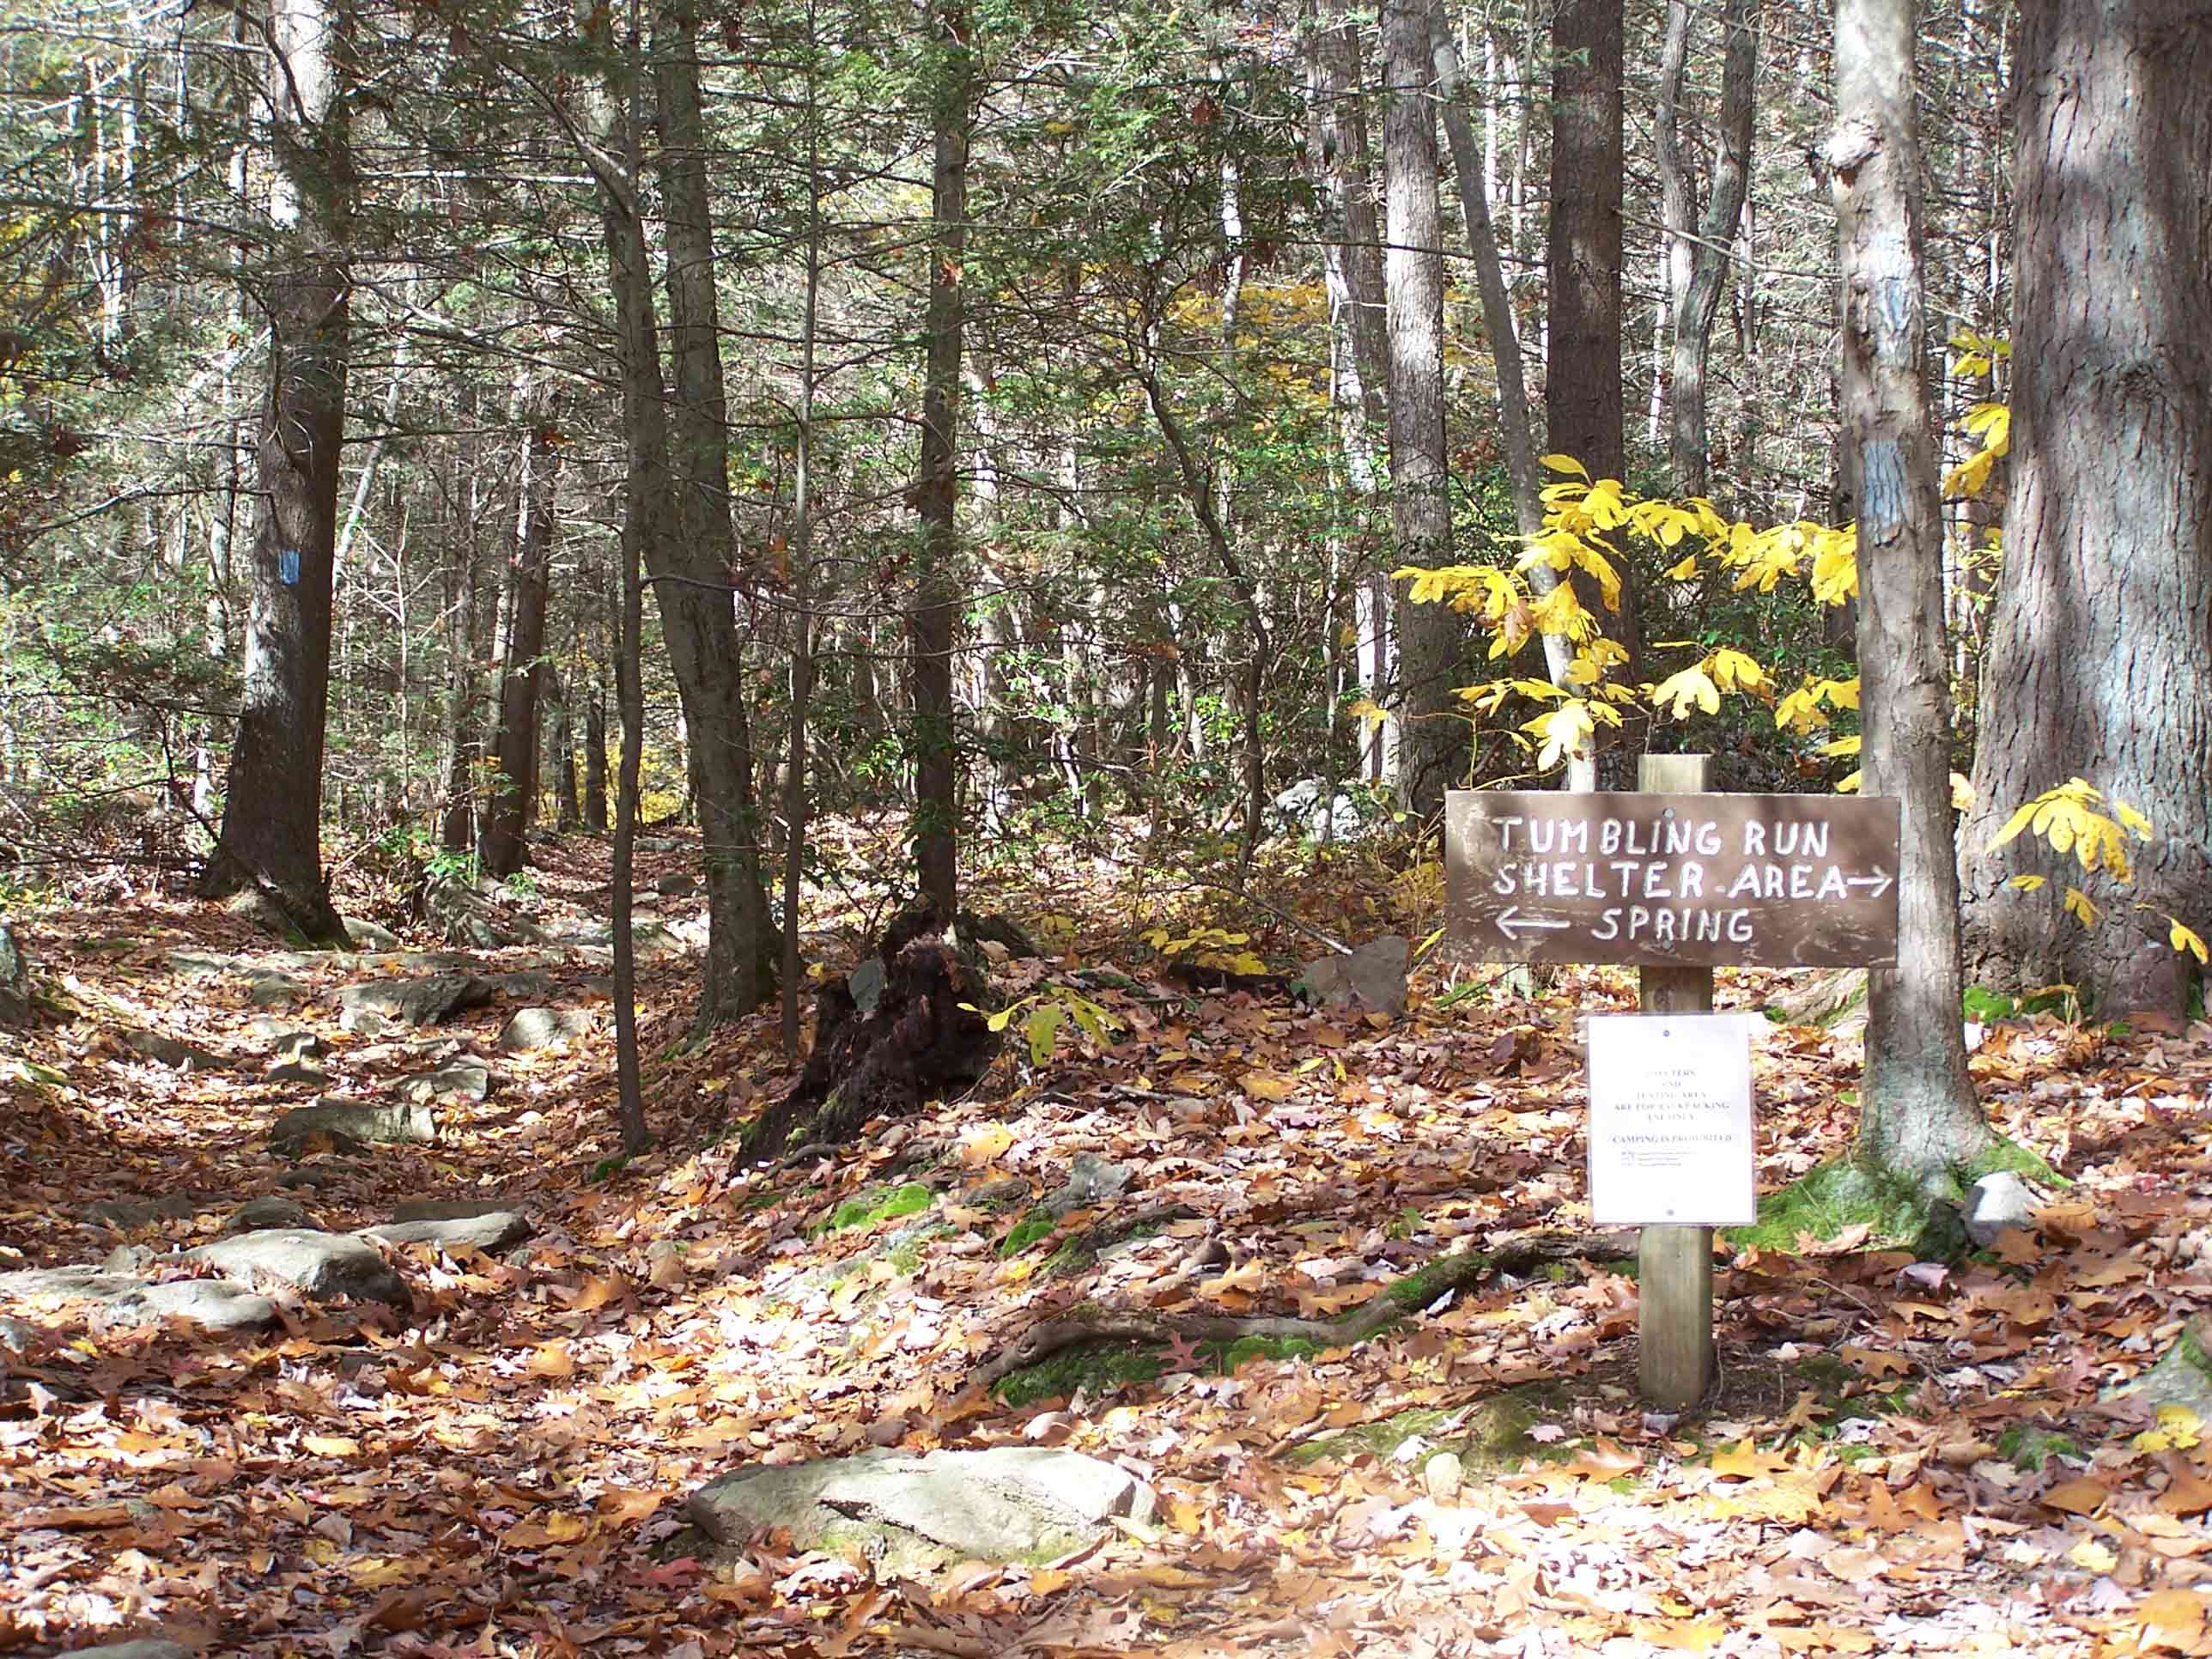 Sign for Tumbling Run Shelter - just North of Old Forge Road. Courtesy at@rohland.org